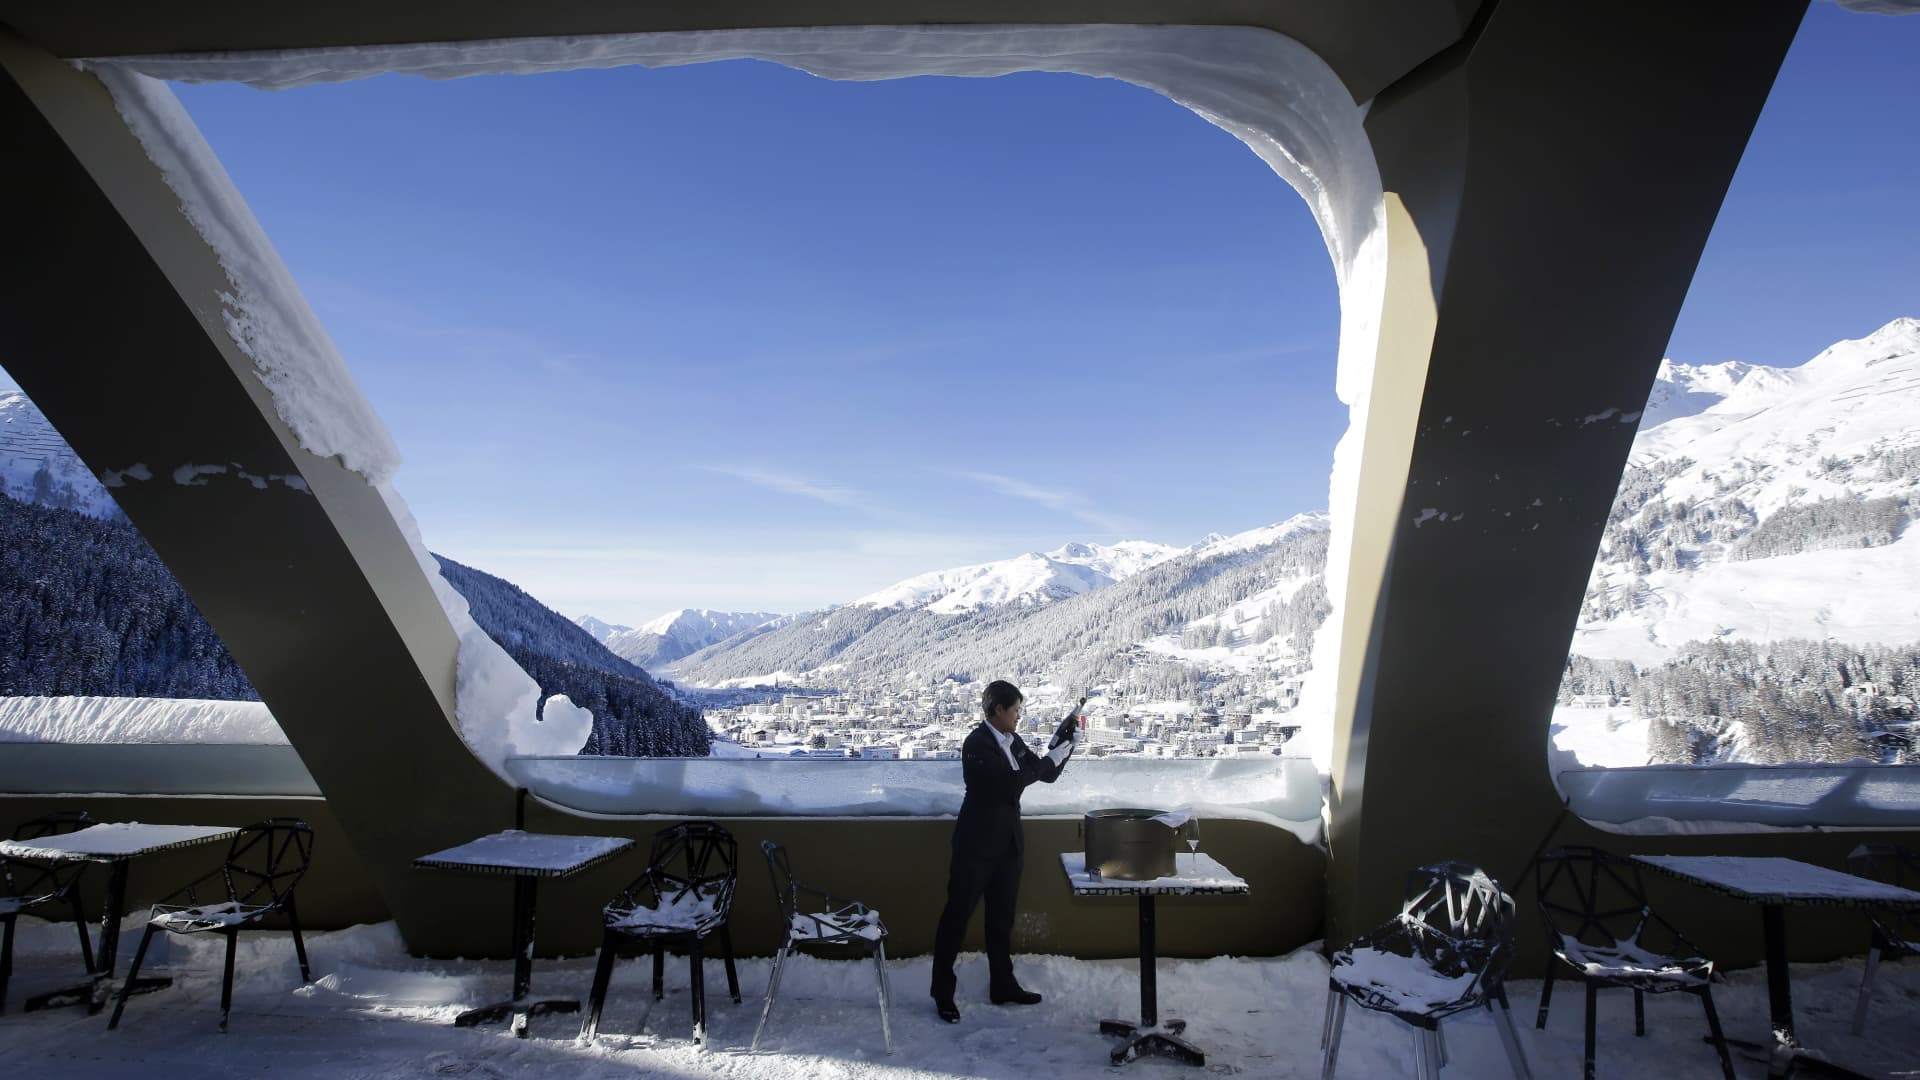 'The Davos underground': A final take on the secretive parties of the world's rich and powerful